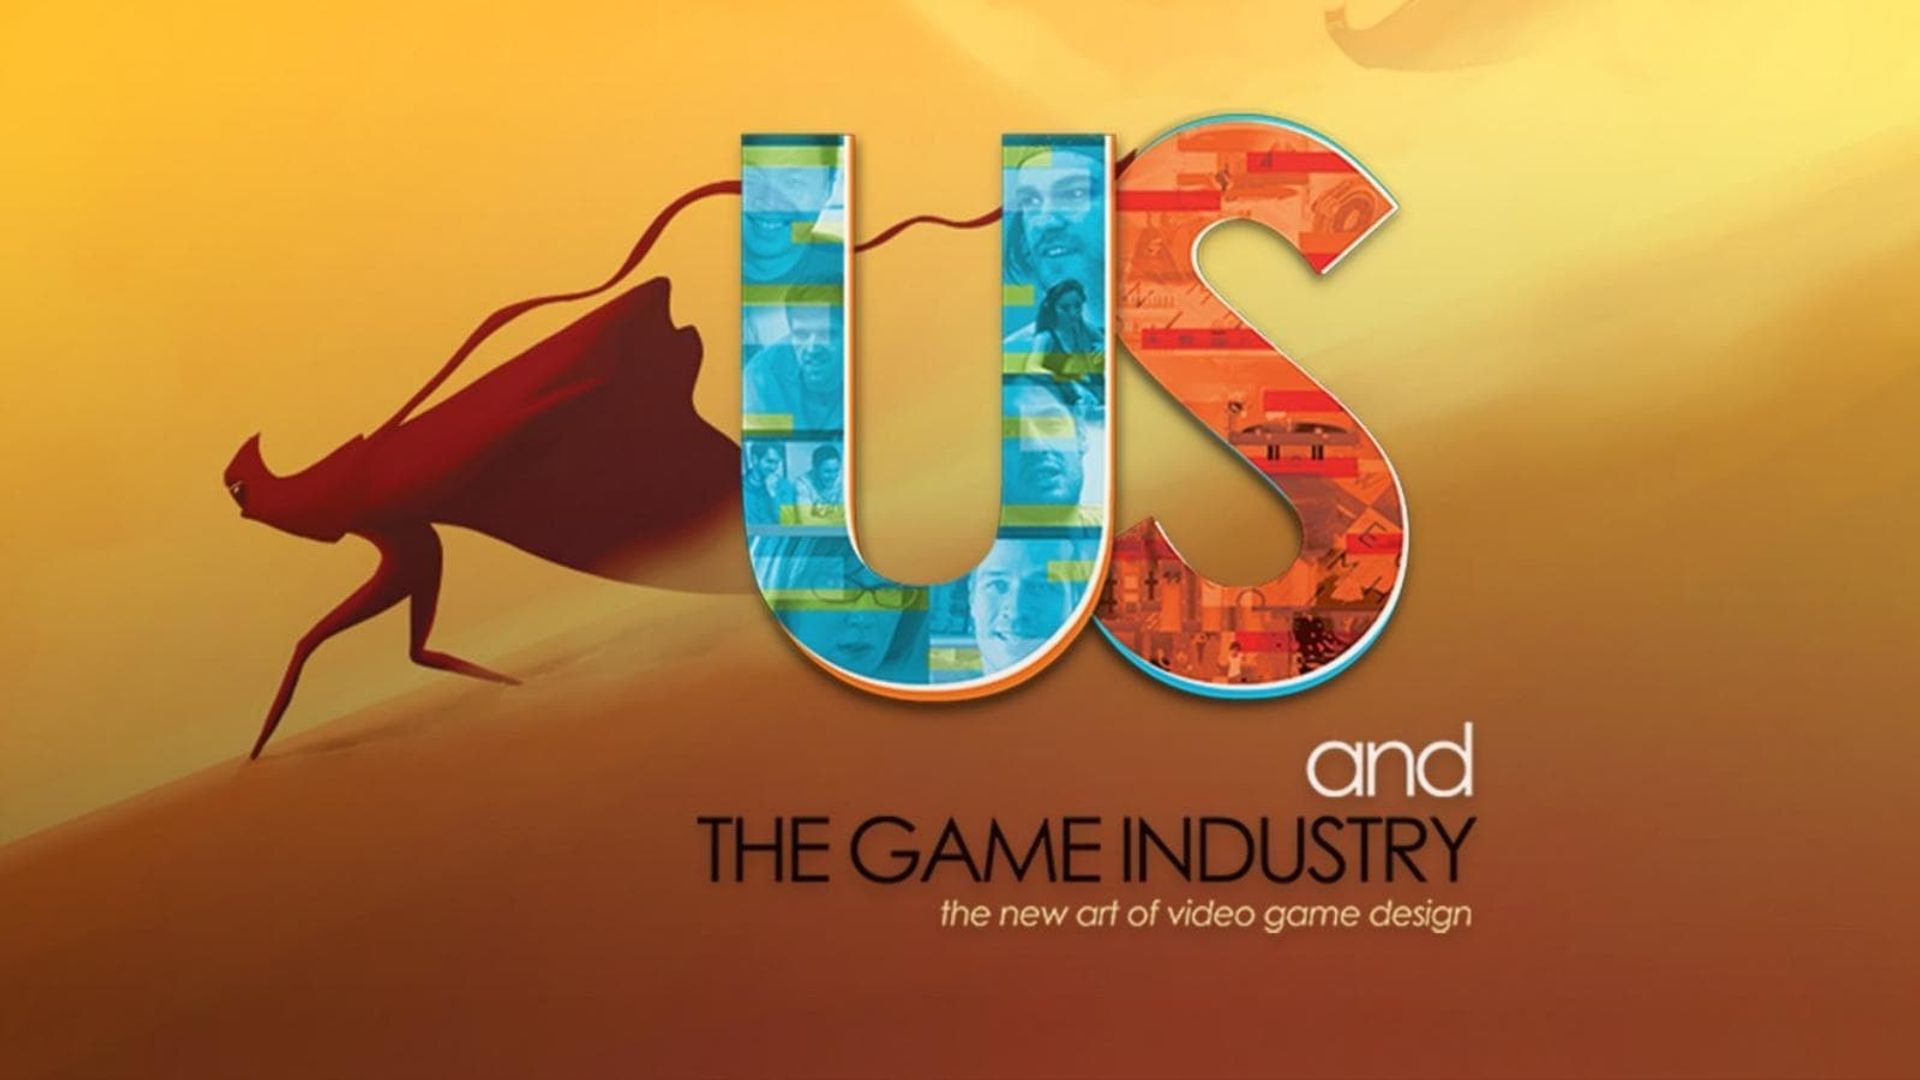 Us and the Game Industry background